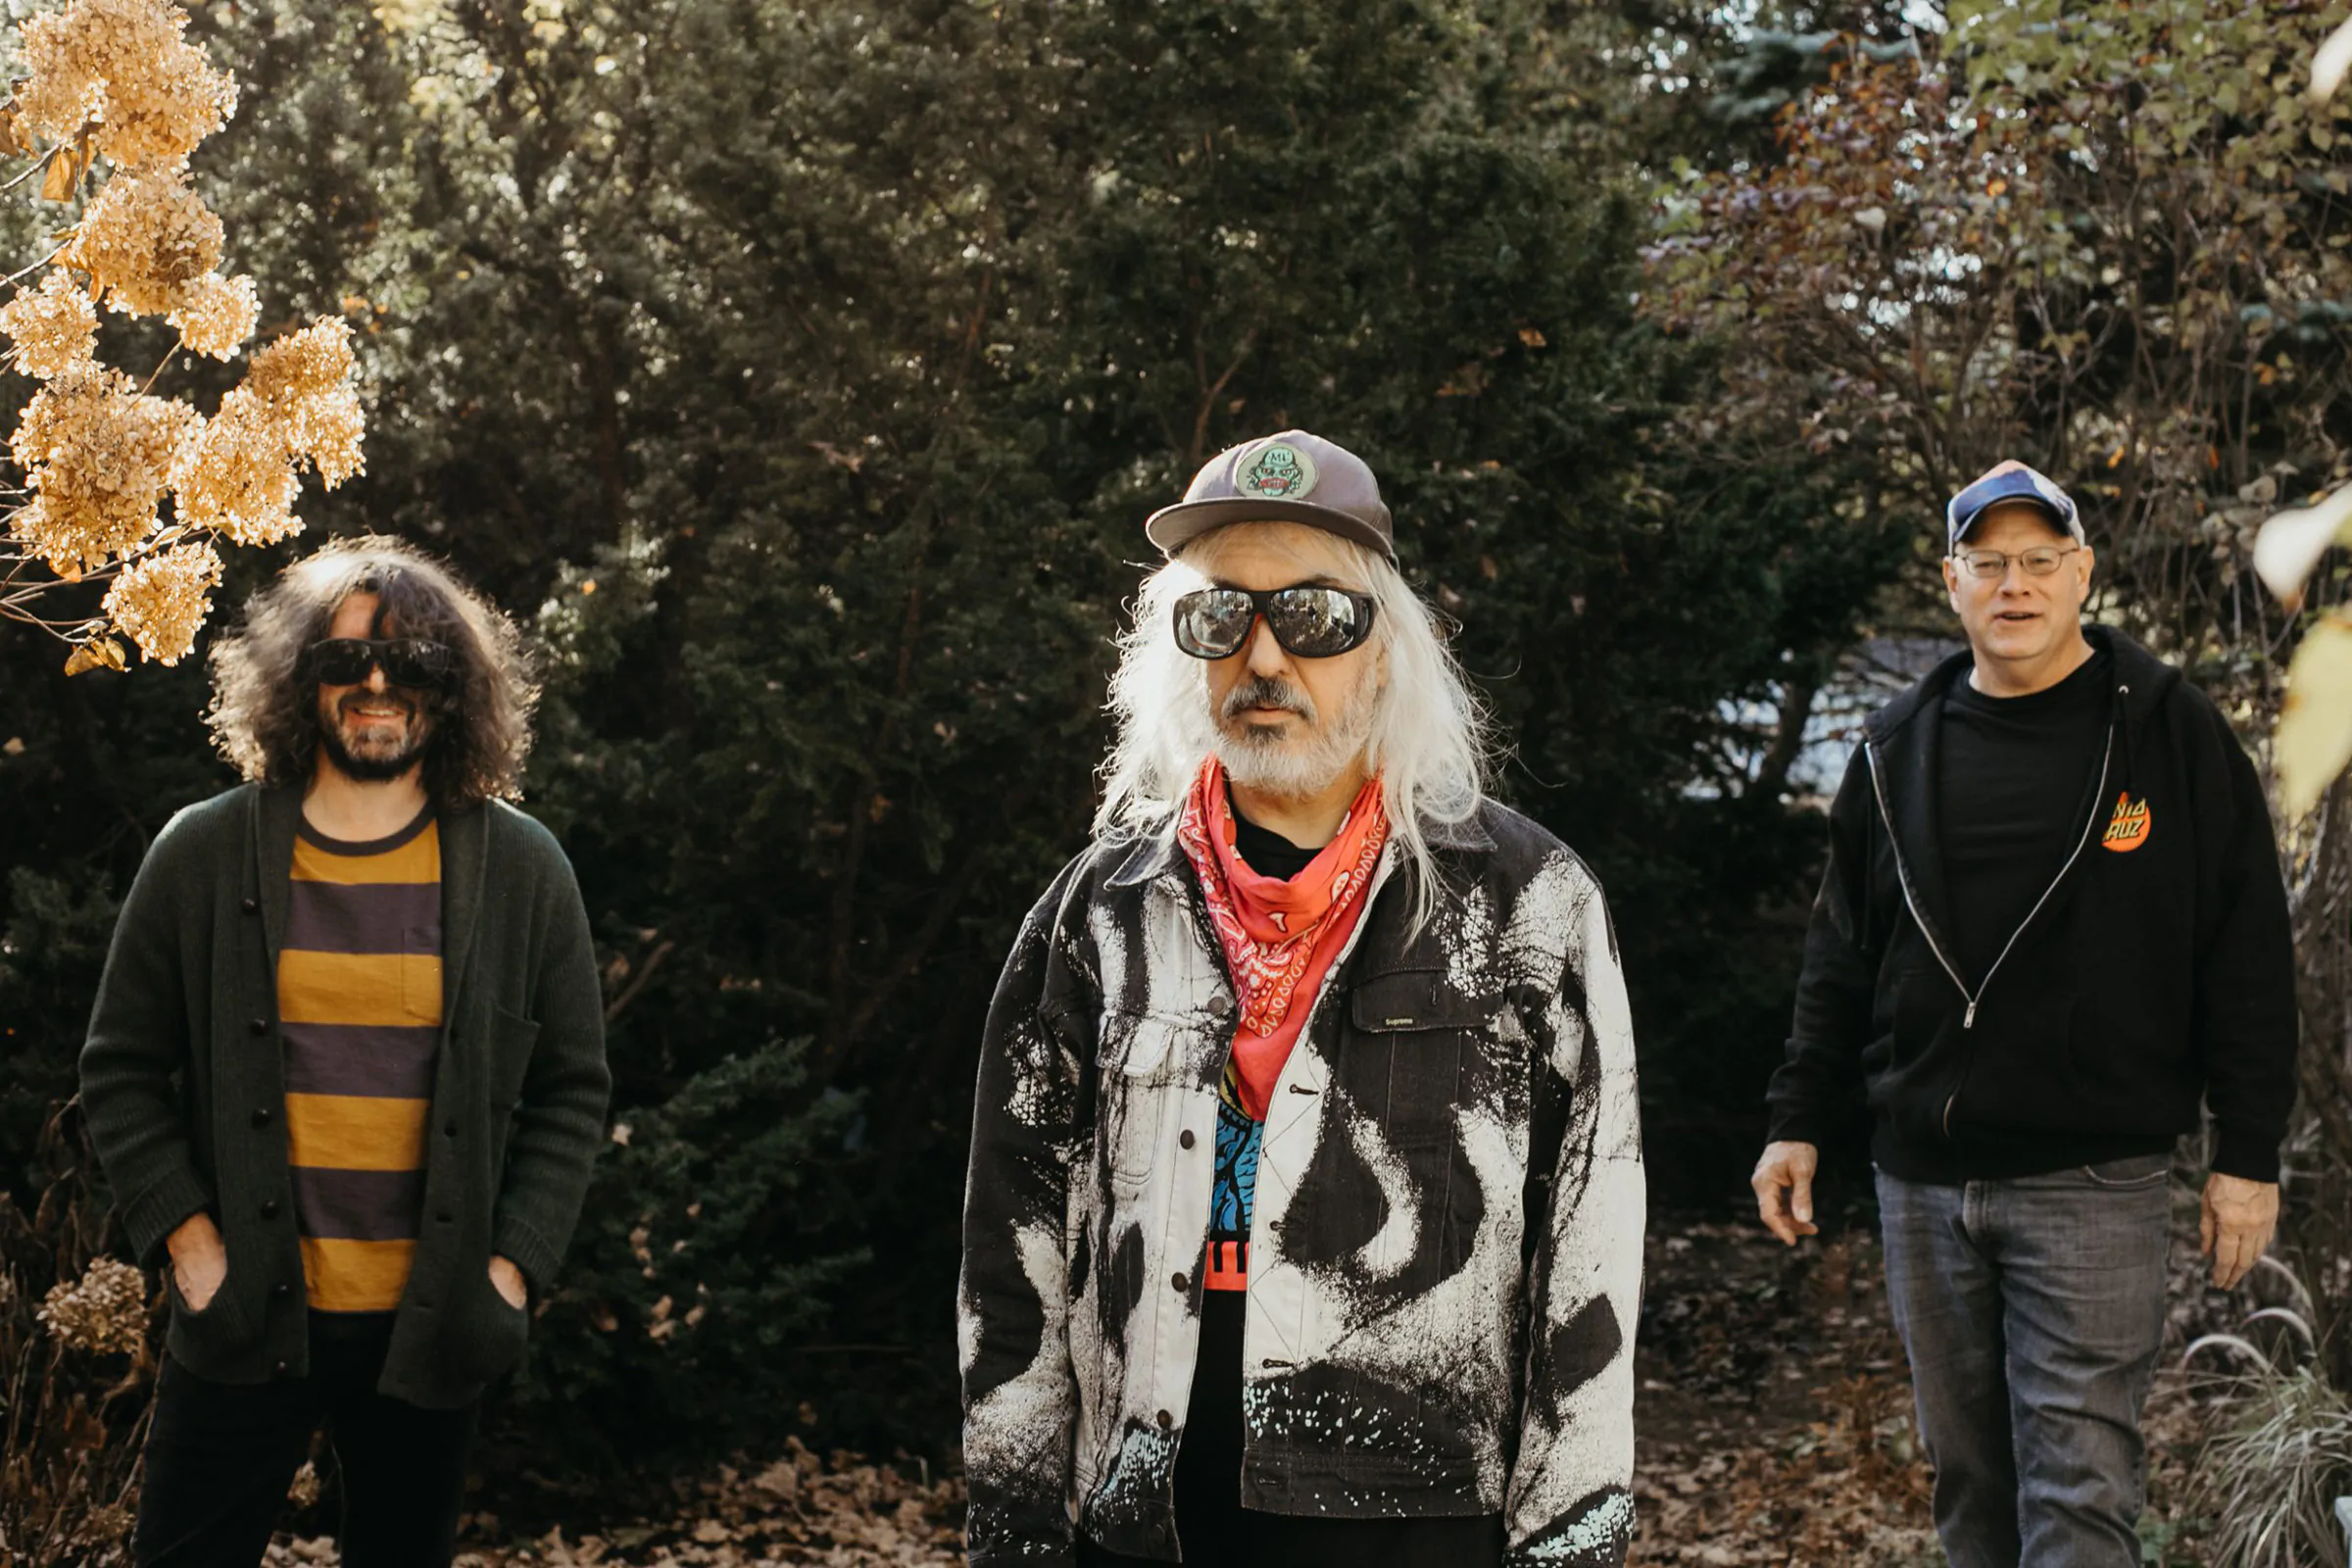 DINOSAUR JR. share video for new single ‘Garden’ – taken from new album ‘Sweep It Into Space’ out April 23rd